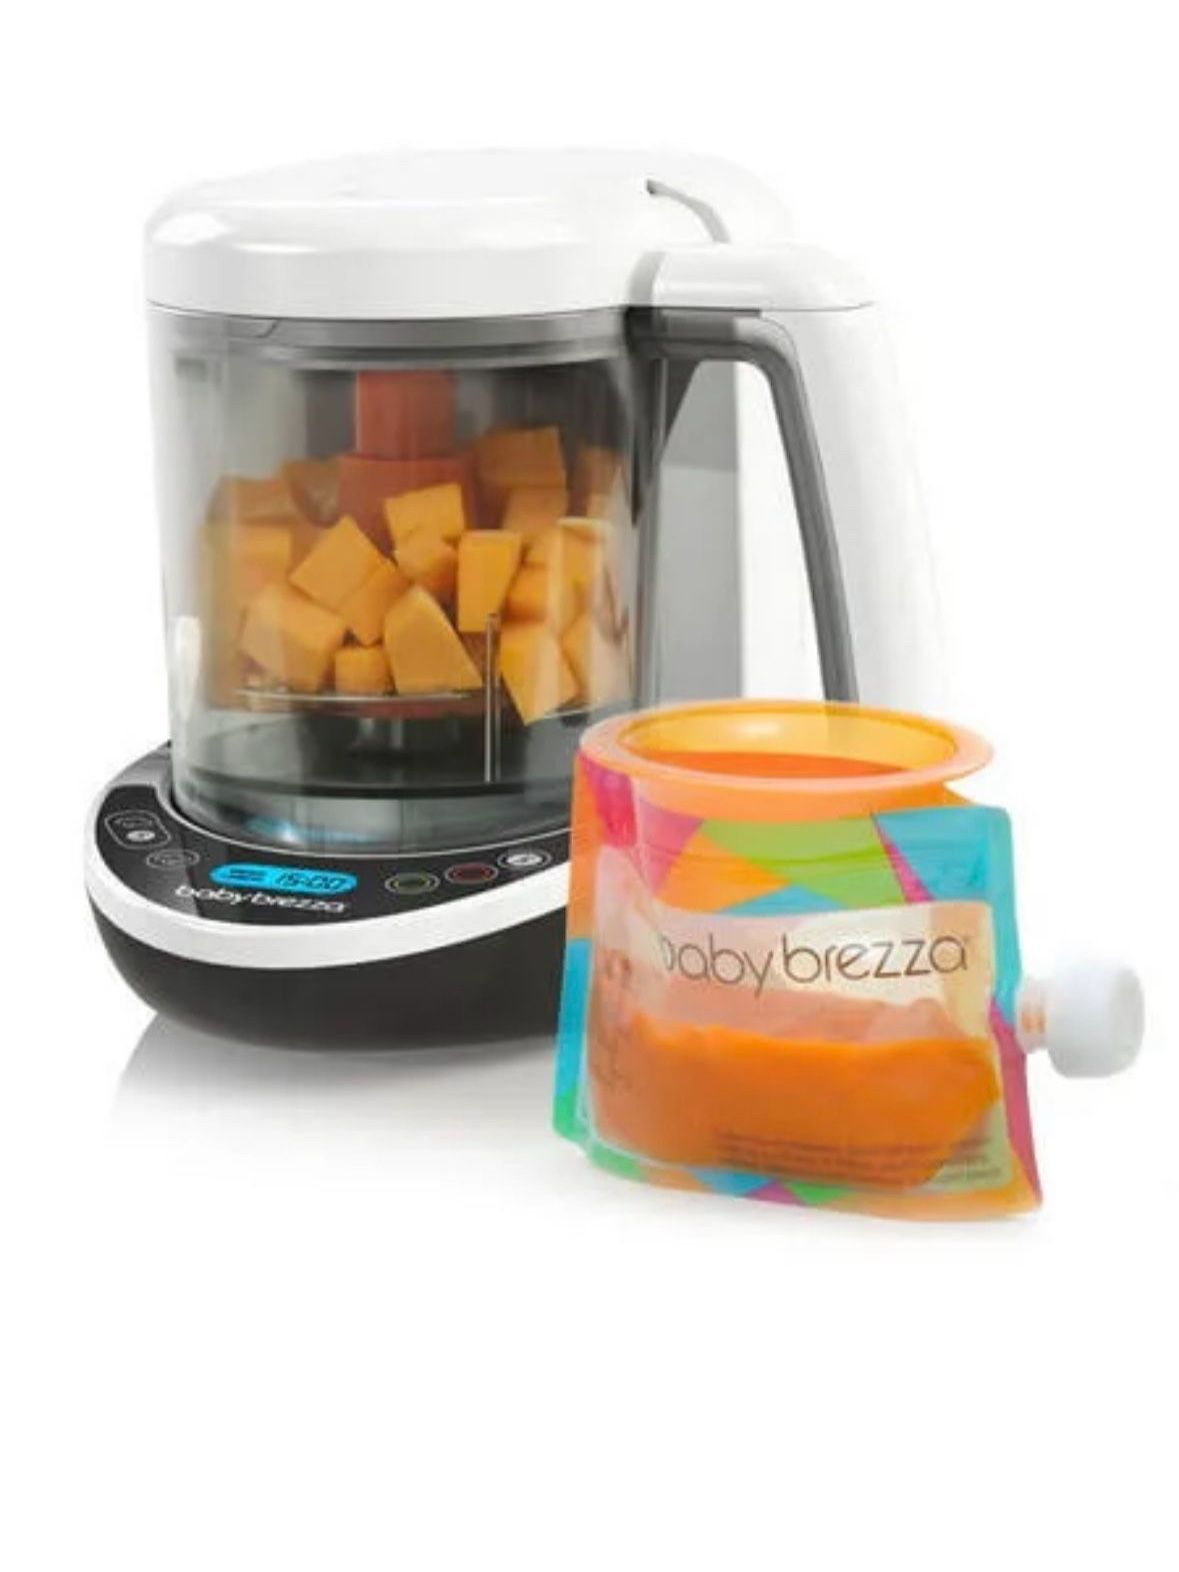 Baby Brezza One Step Deluxe Food Maker